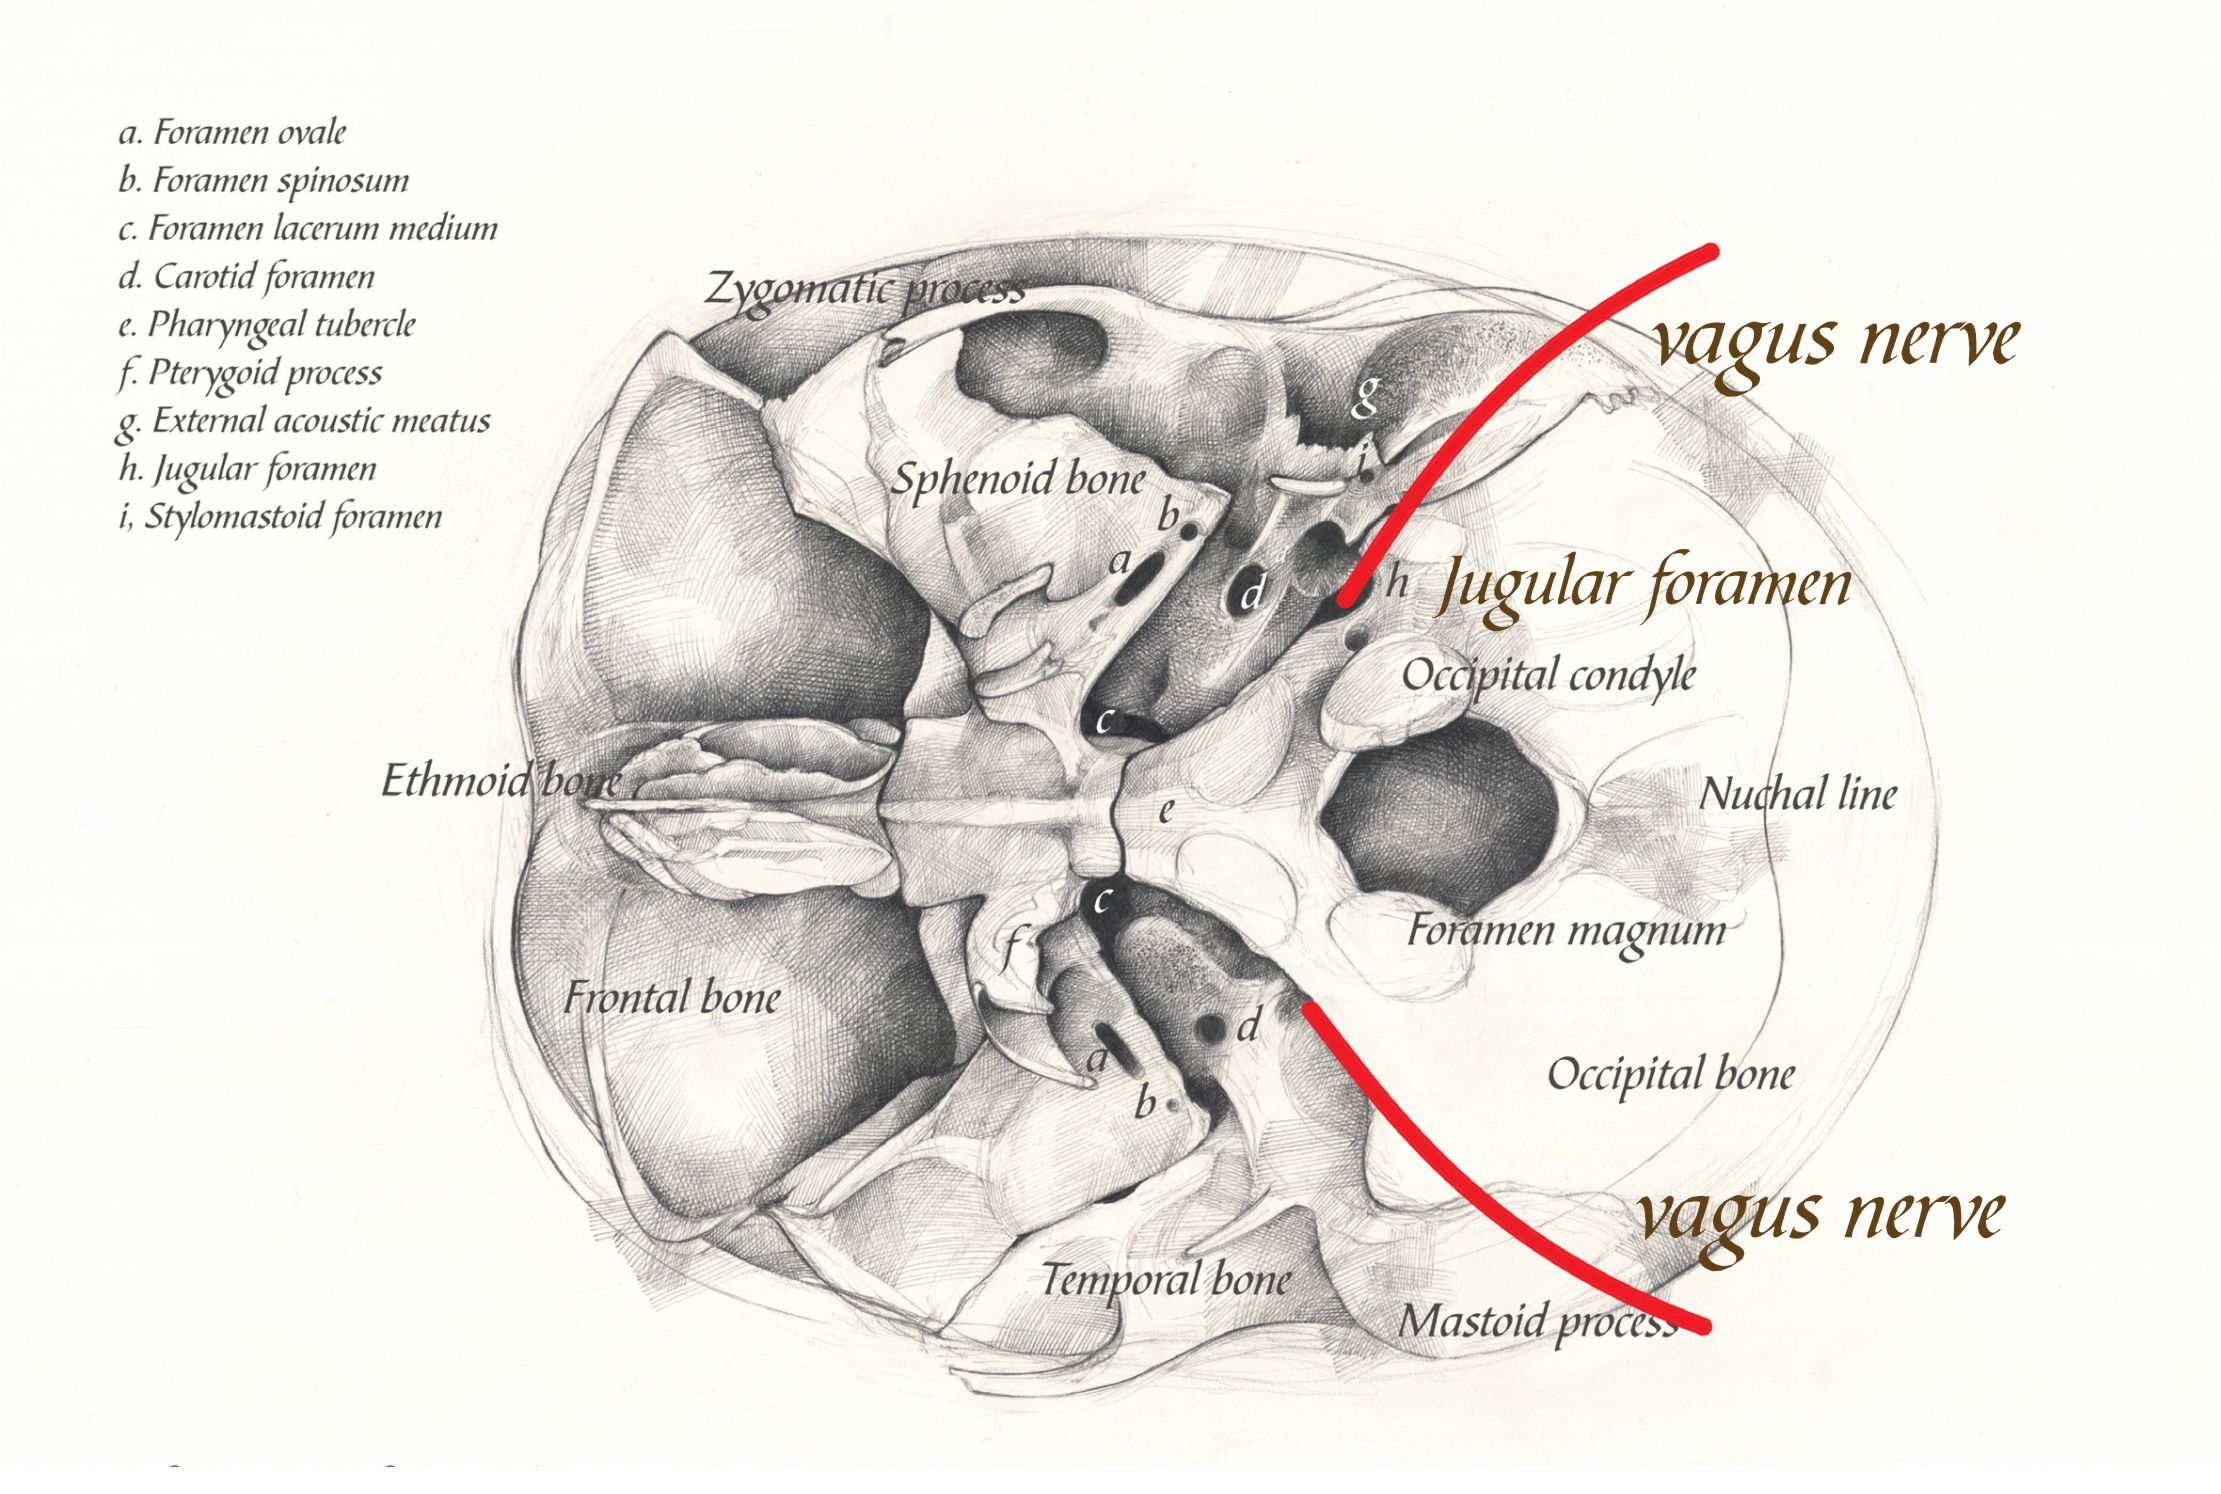 Enigma of the Vagus Nerve